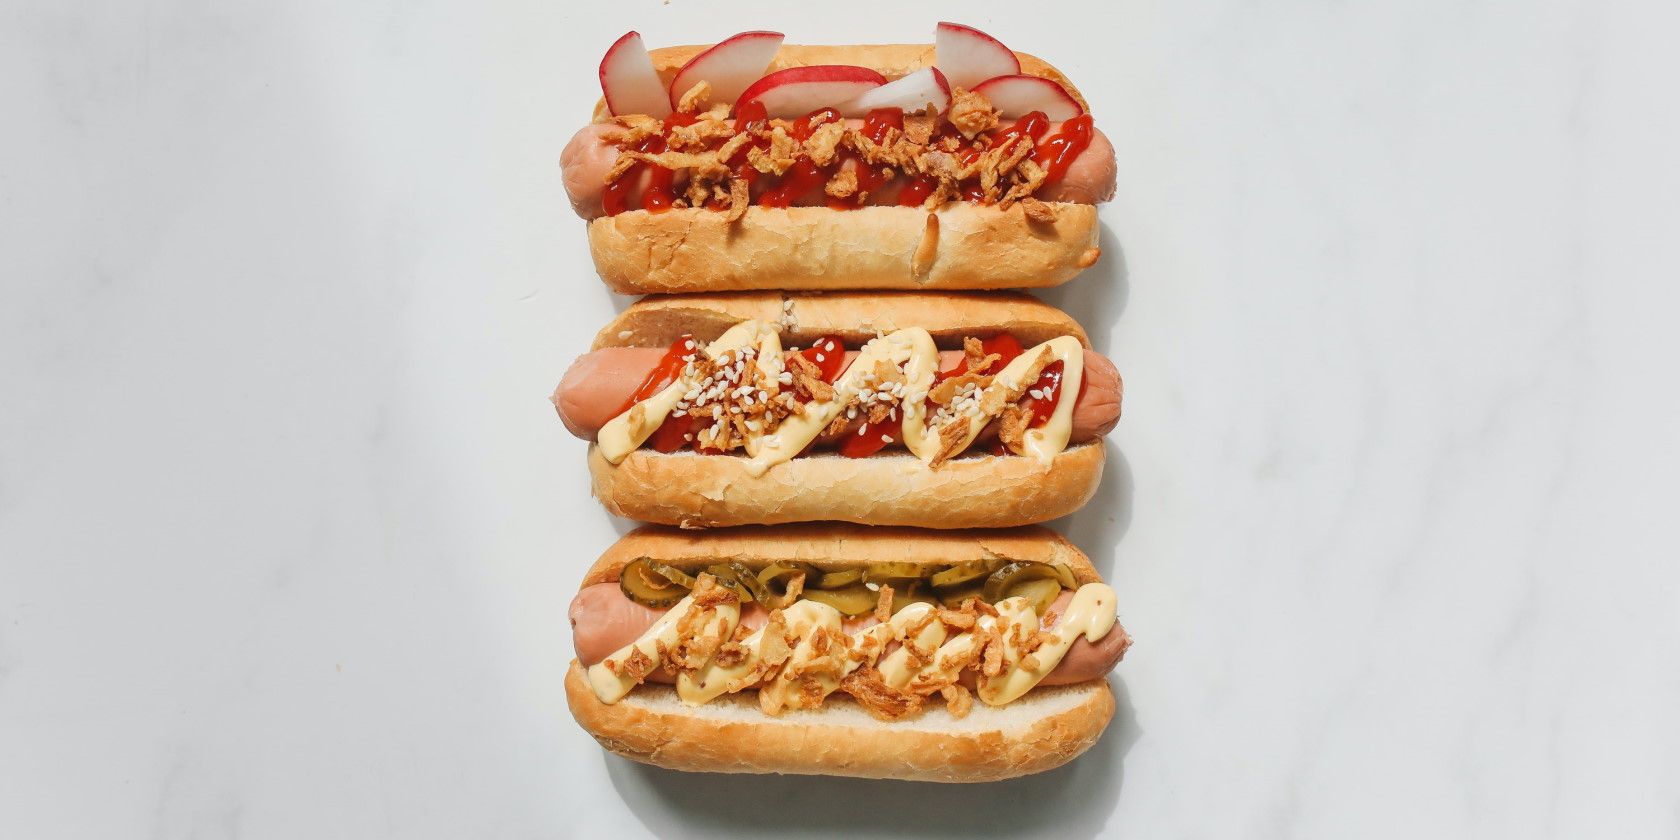 three gourmet hotdogs with different toppings and sauces